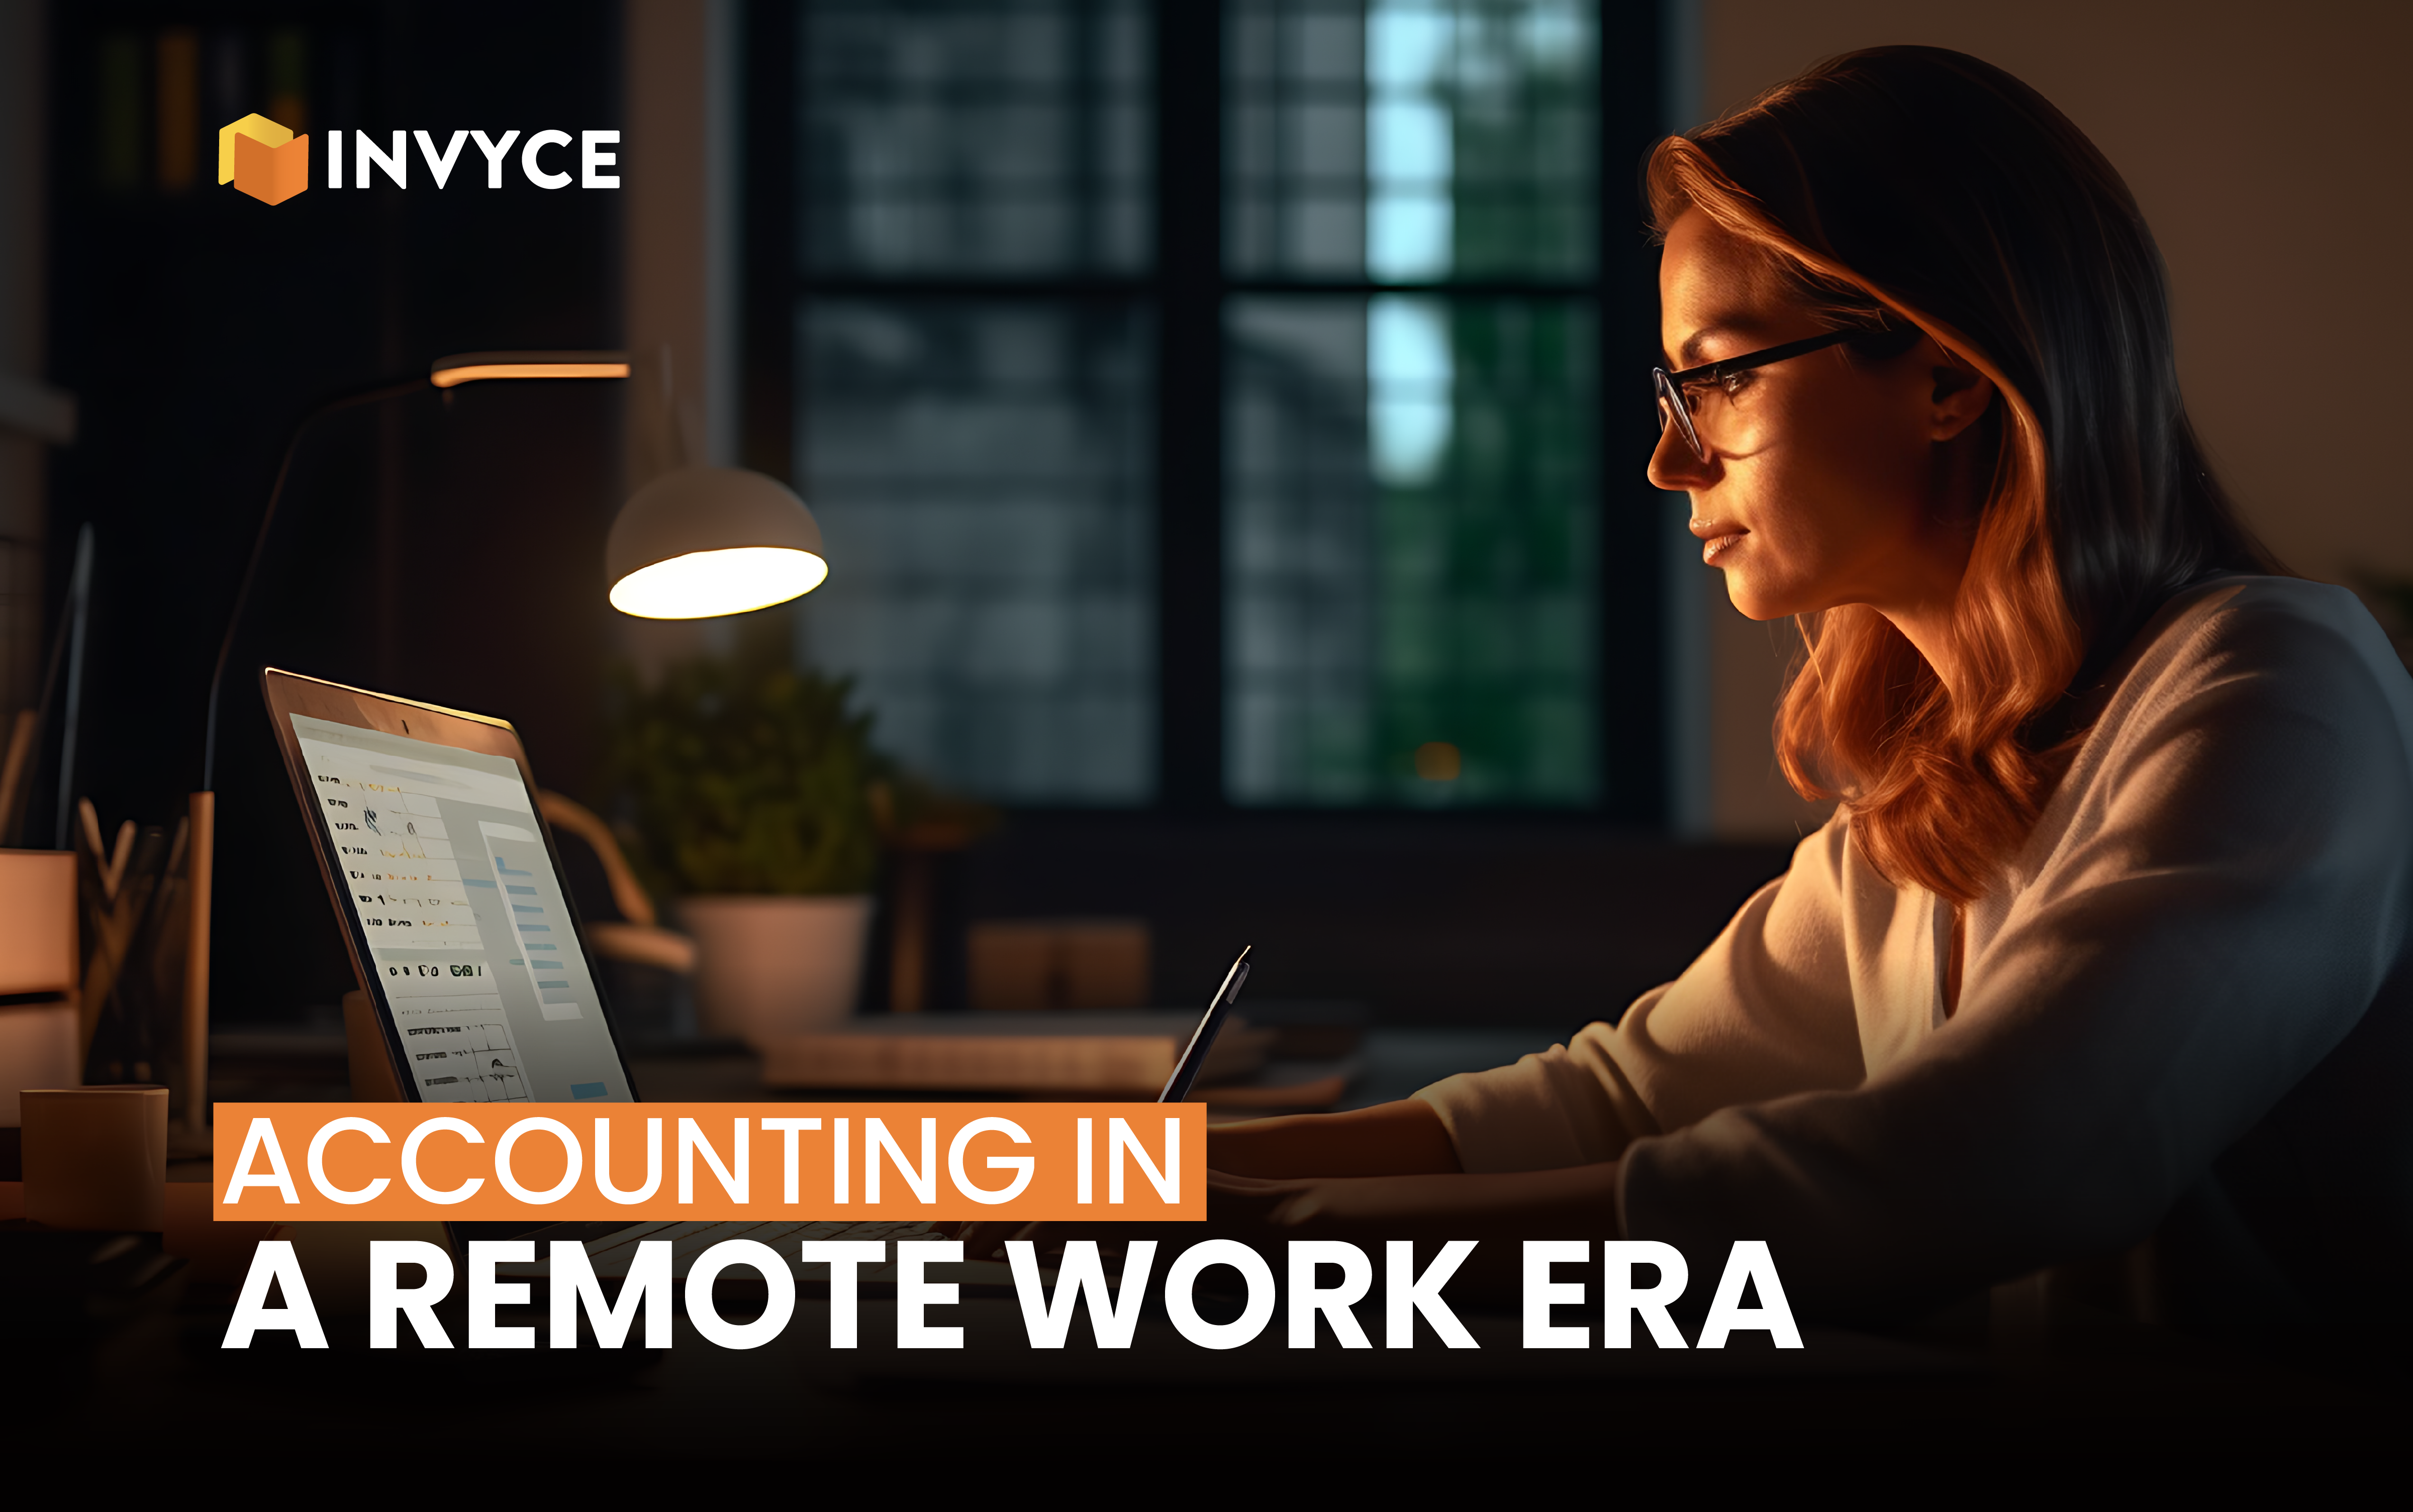 #Accounting in a Remote Work Era